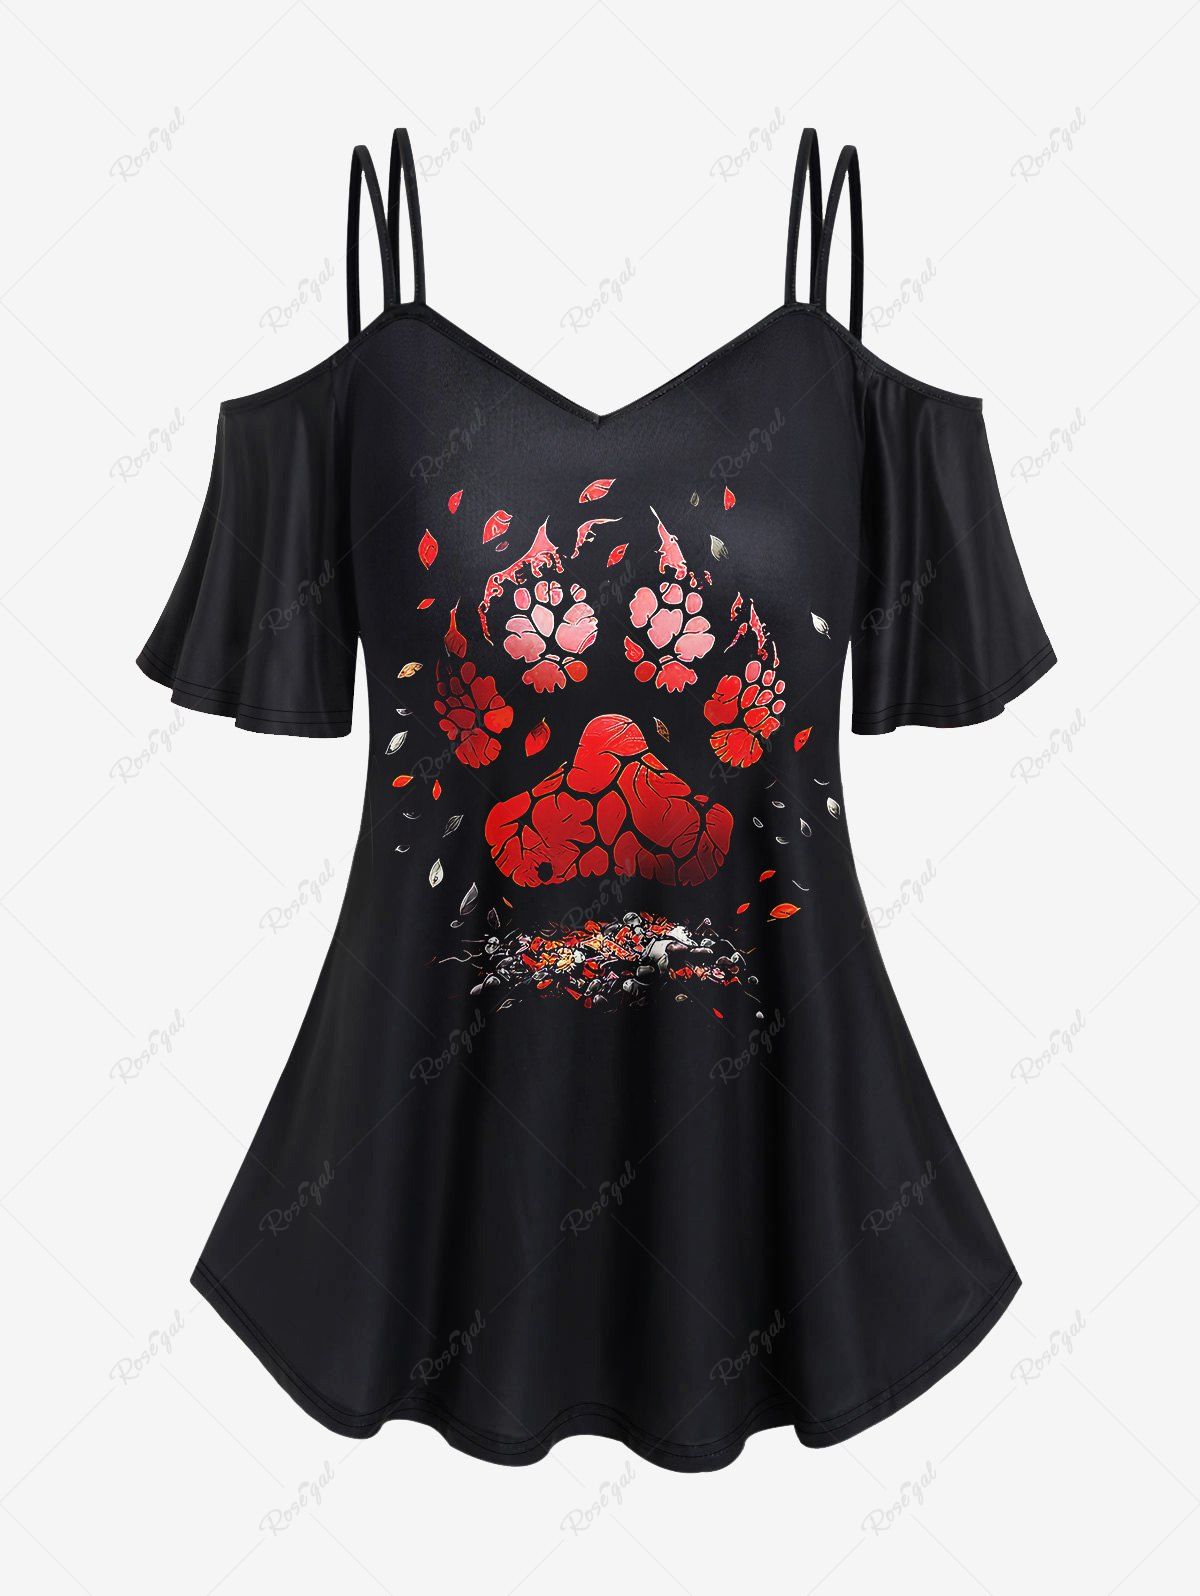 New Gothic Cat Paws Print Cold Shoulder T-shirt  